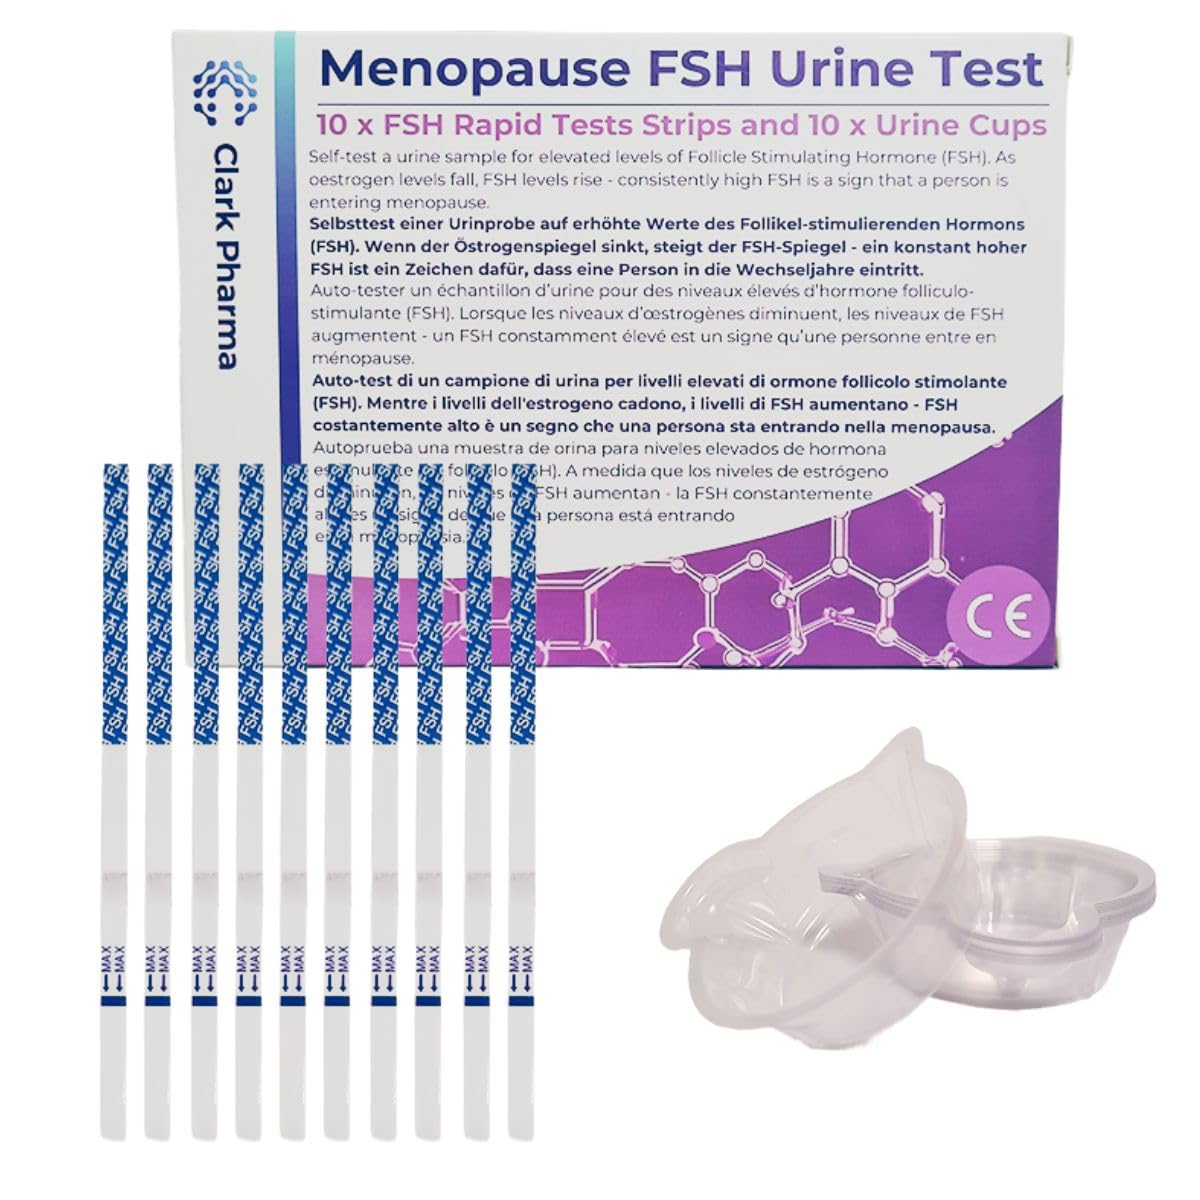 10 Pack Menopause Test Kit   10 Test Strips & 10 Urine Cups   Women Follicle Stimulating Hormone Detection   Self Test for Early Menopause Perimenopause   Fertility Test